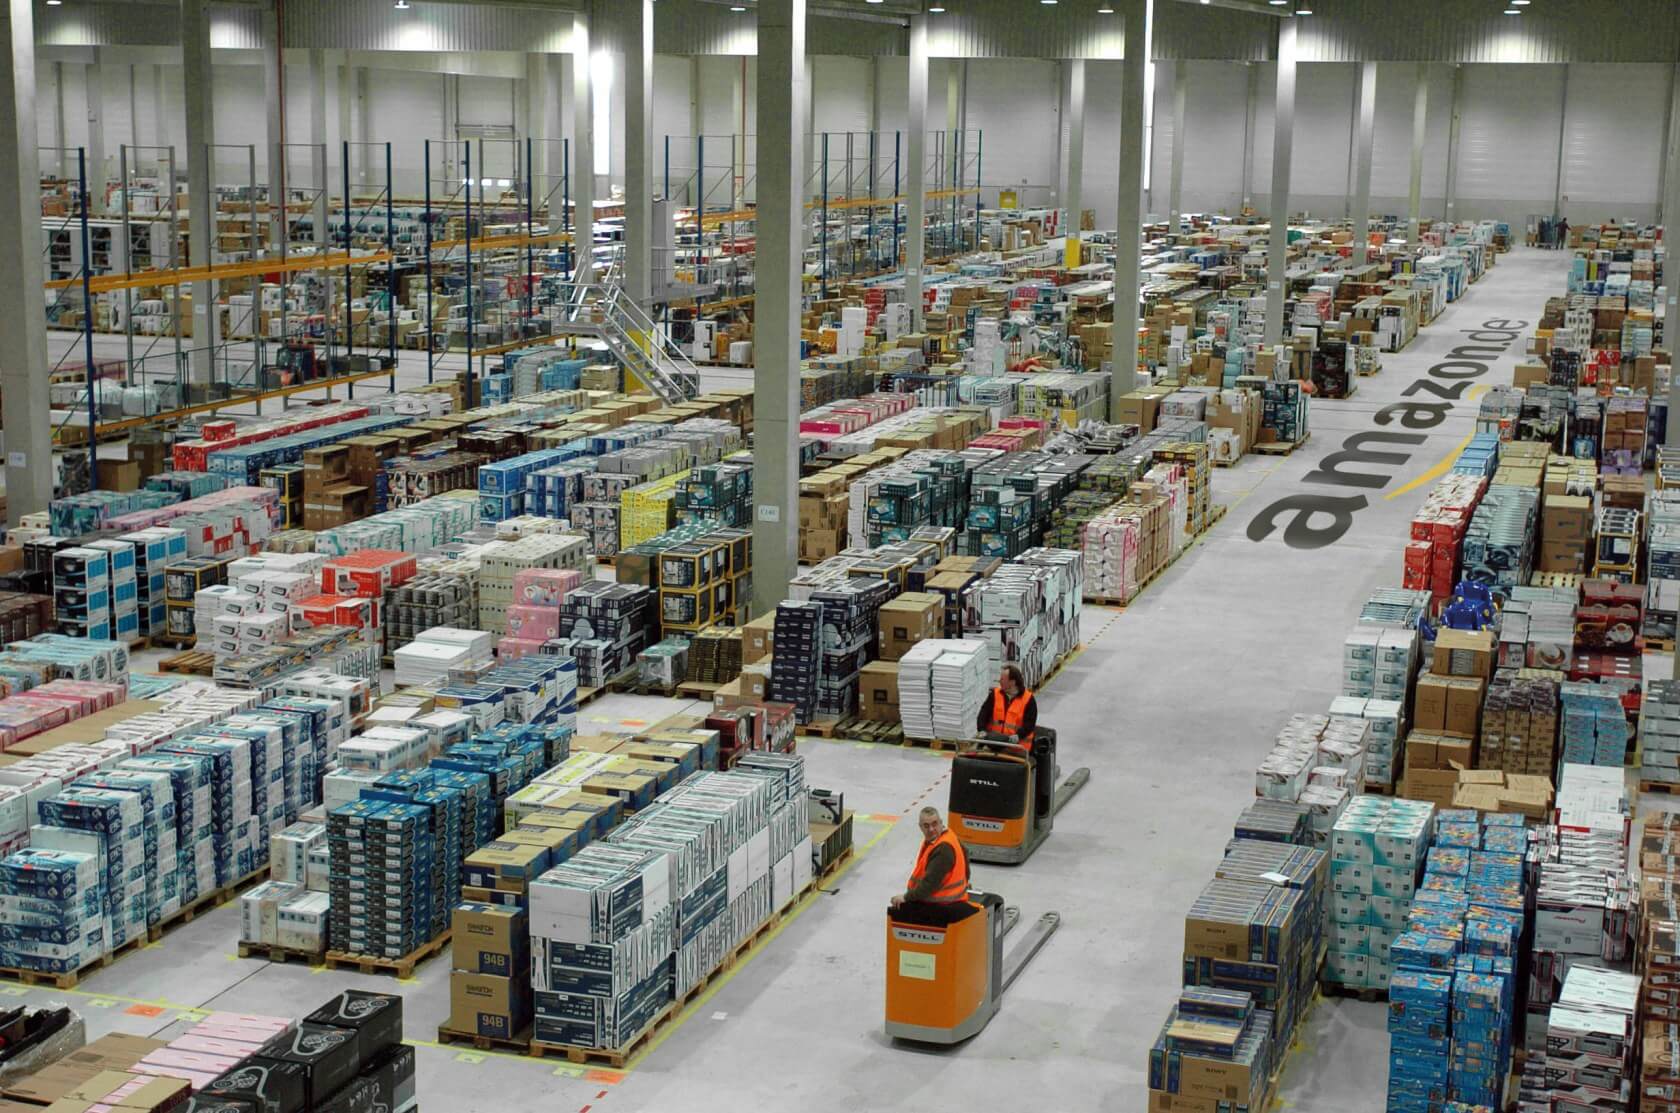 Amazon's European warehouse employees are walking out on Black Friday (updated)